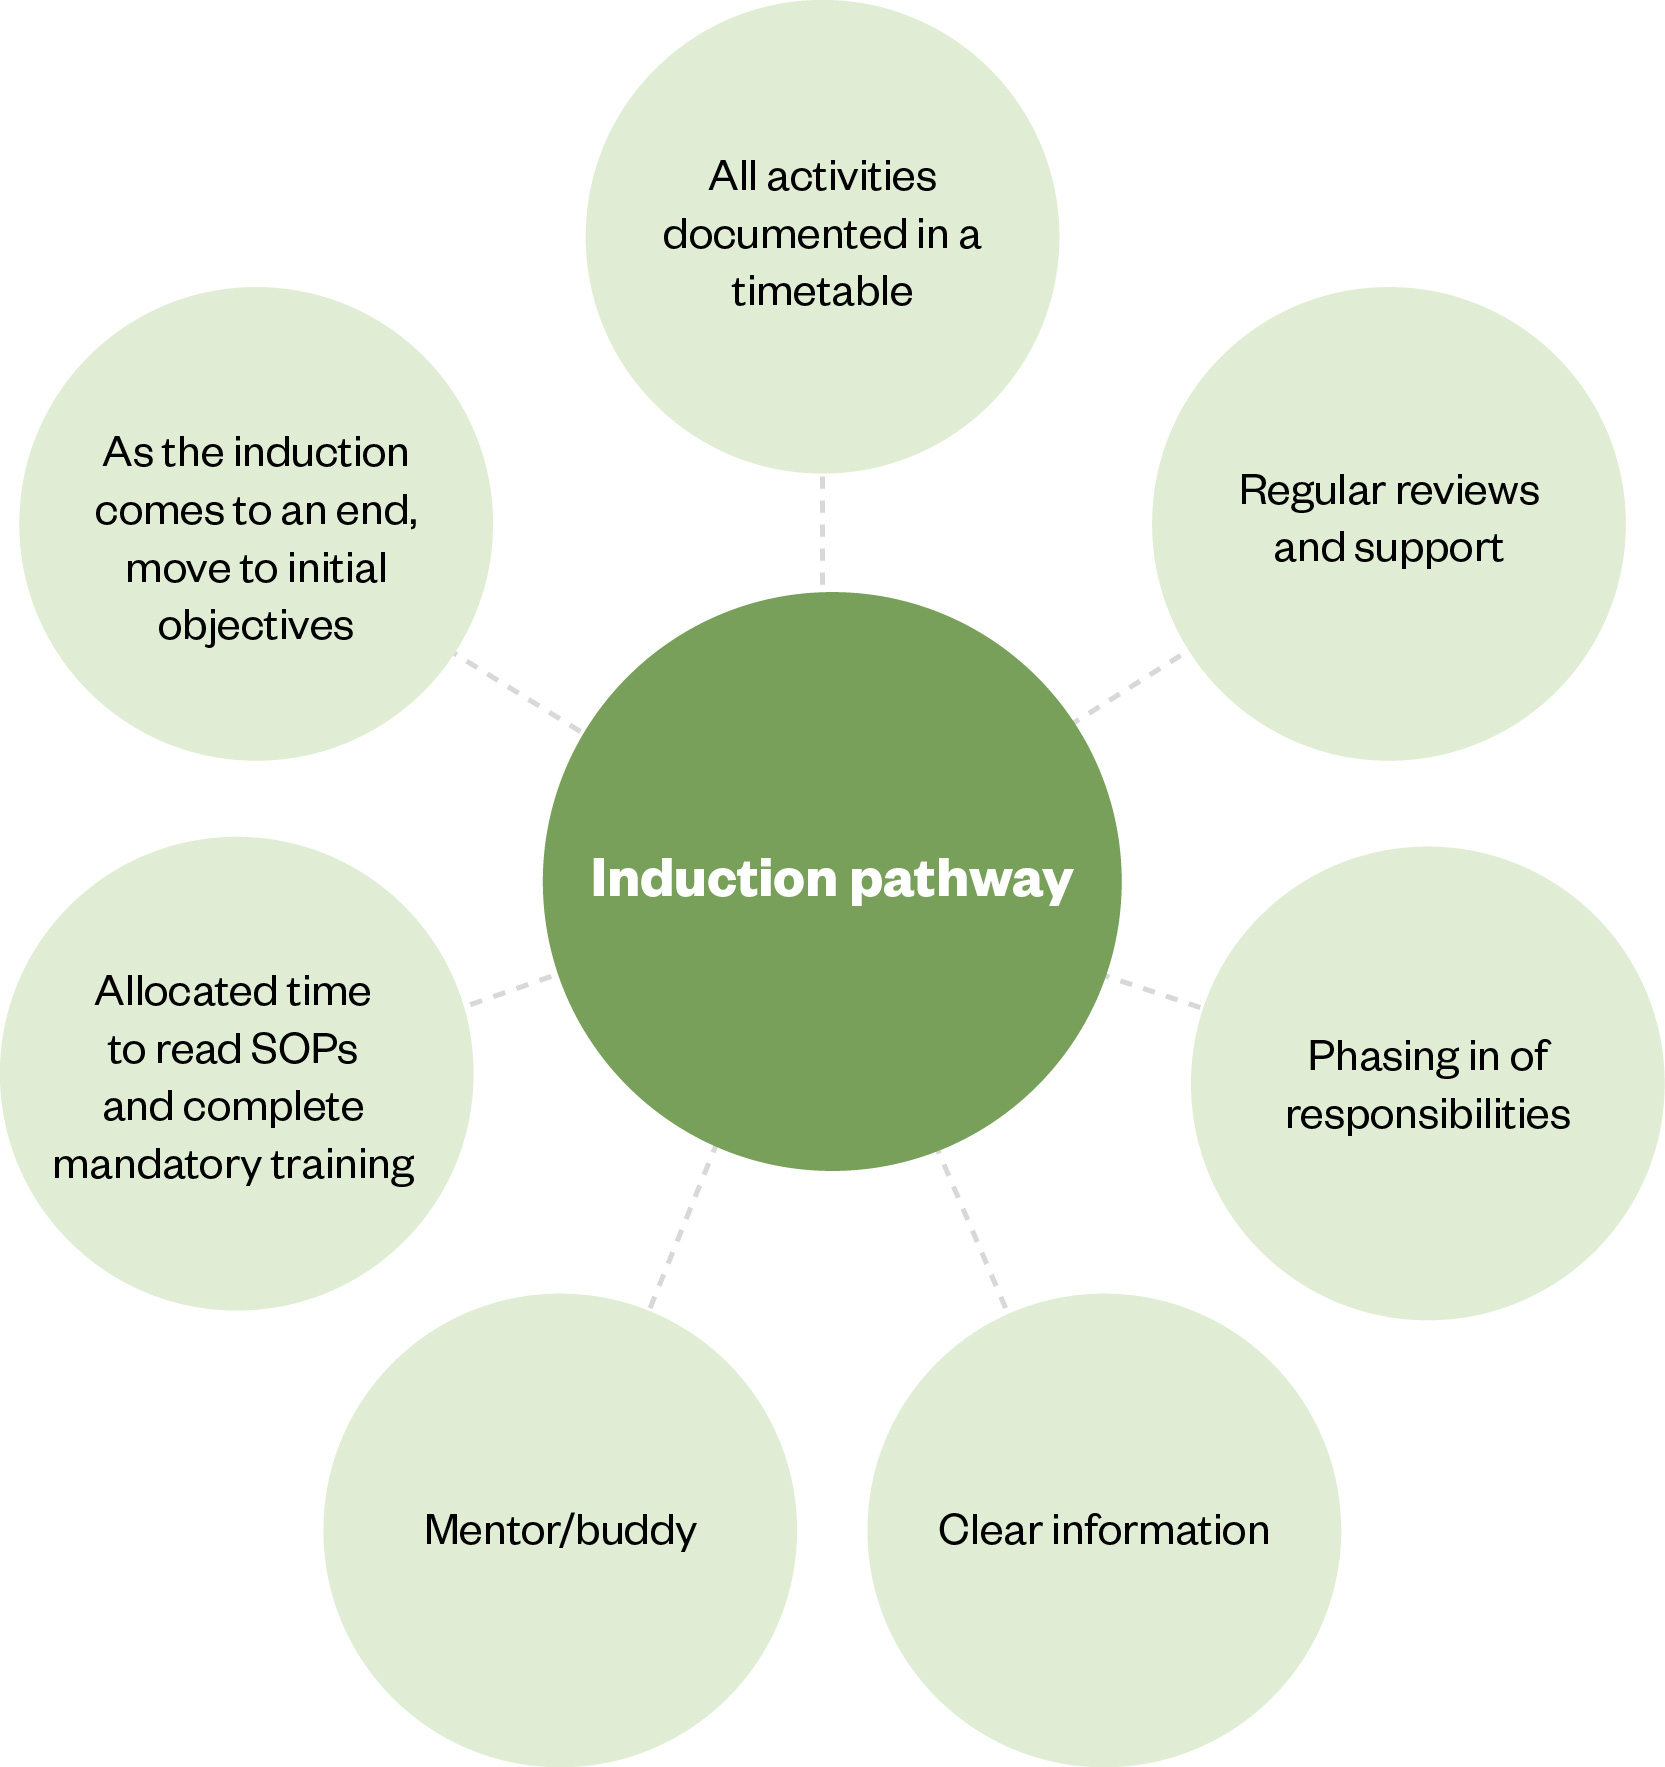 Graphic showing the elements of a structured induction pathway: all activities documented in a timetable; regular reviews and support; phasing in of responsibilities; clear information; mentor/buddy; allocated time to reap standard operating procedures and completed mandatory training, and; as the induction comes to an end, move to initial objectives.